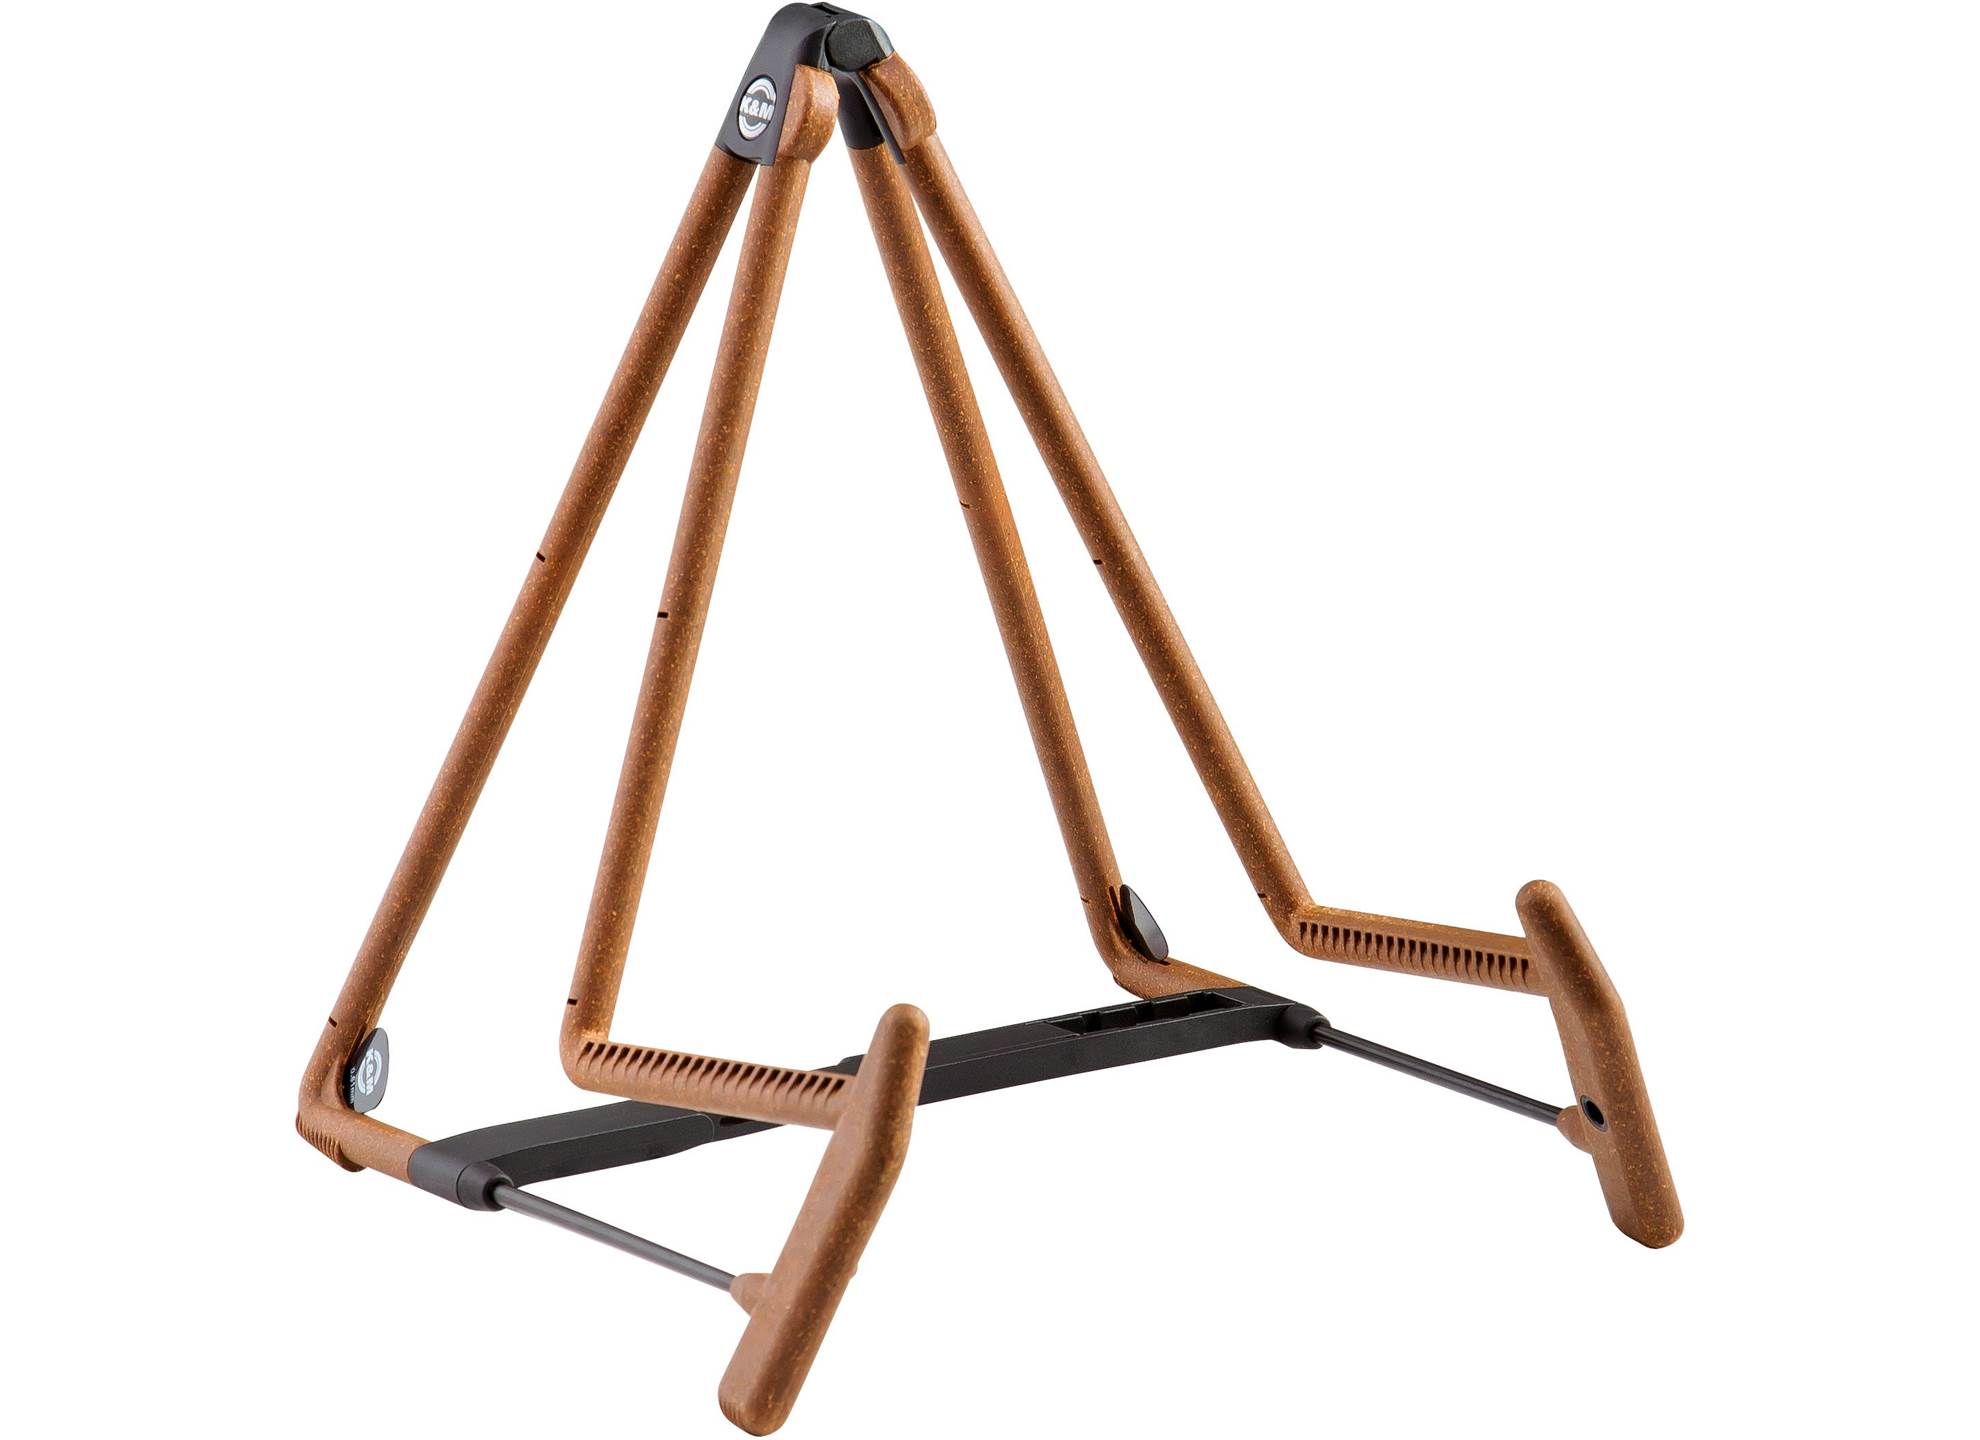 17580-C Heli 2 Acoustic Guitar Stand Cork